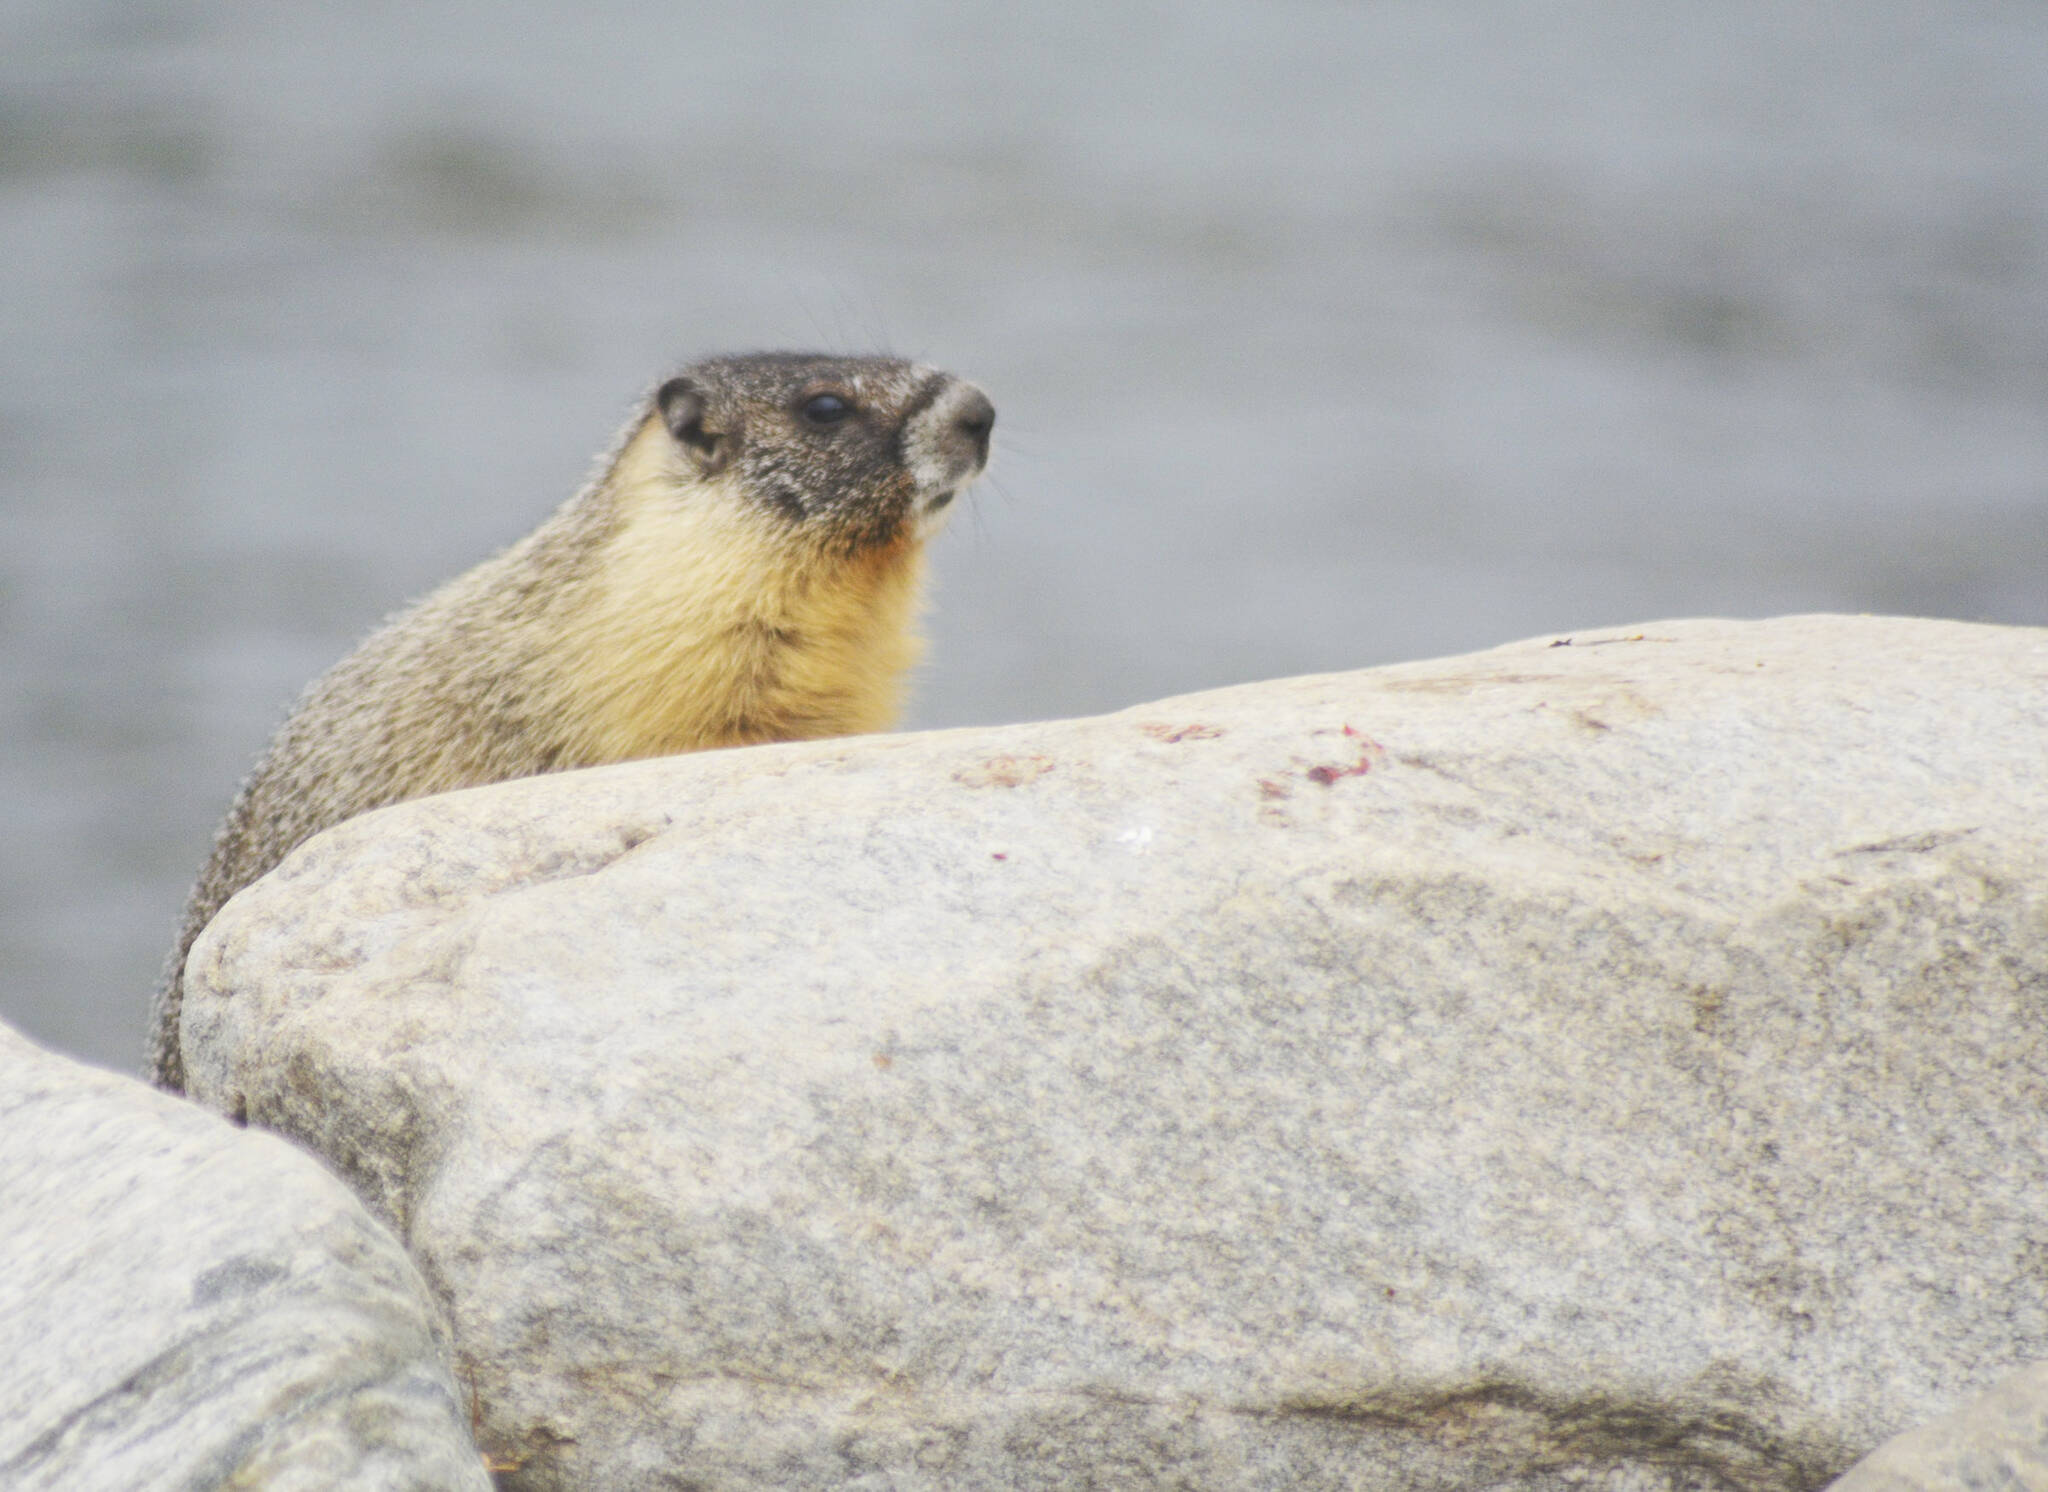 All kinds of critters could be seen near Lake Okanagan.